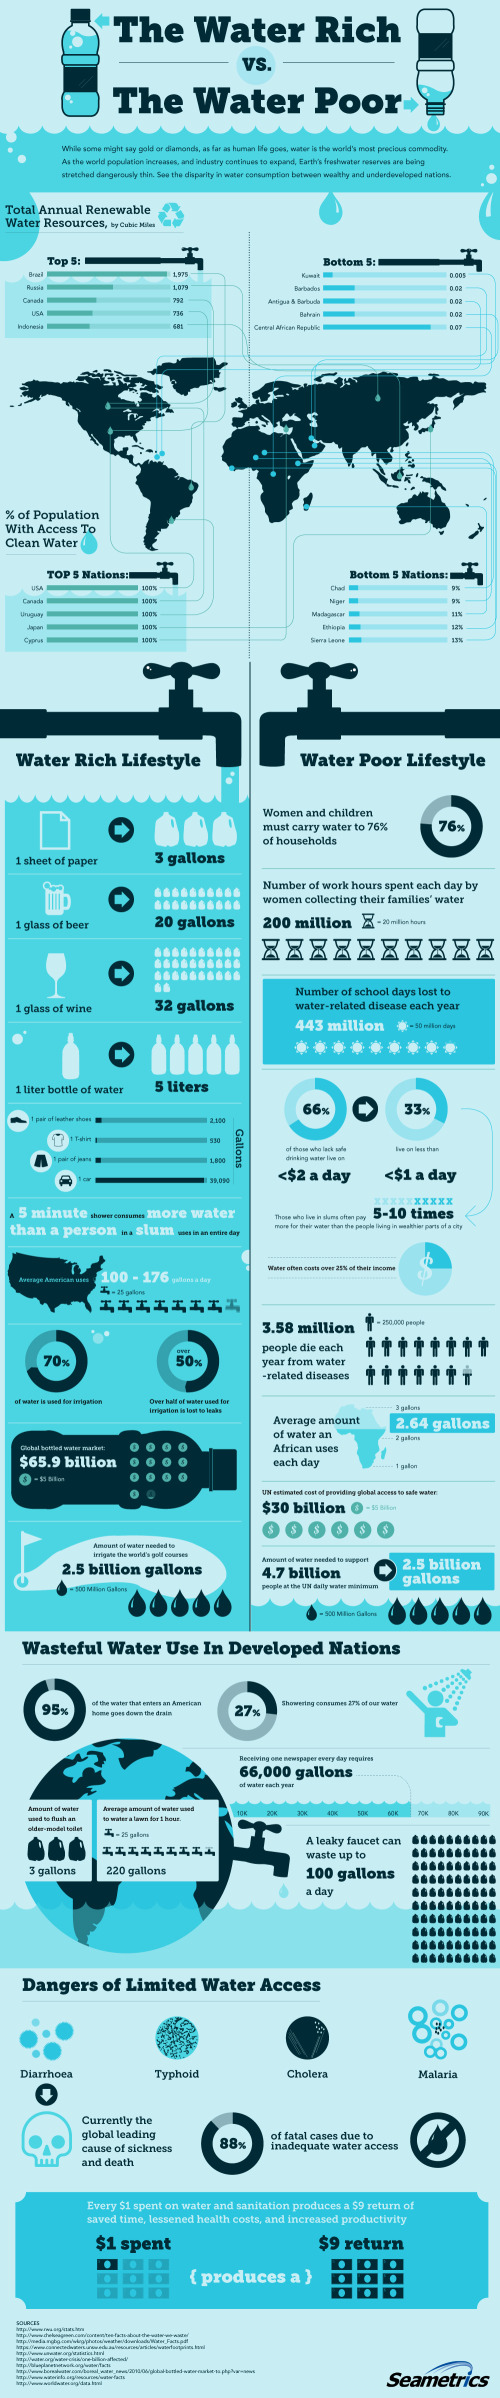 The Water Rich vs The Water Poor infographic